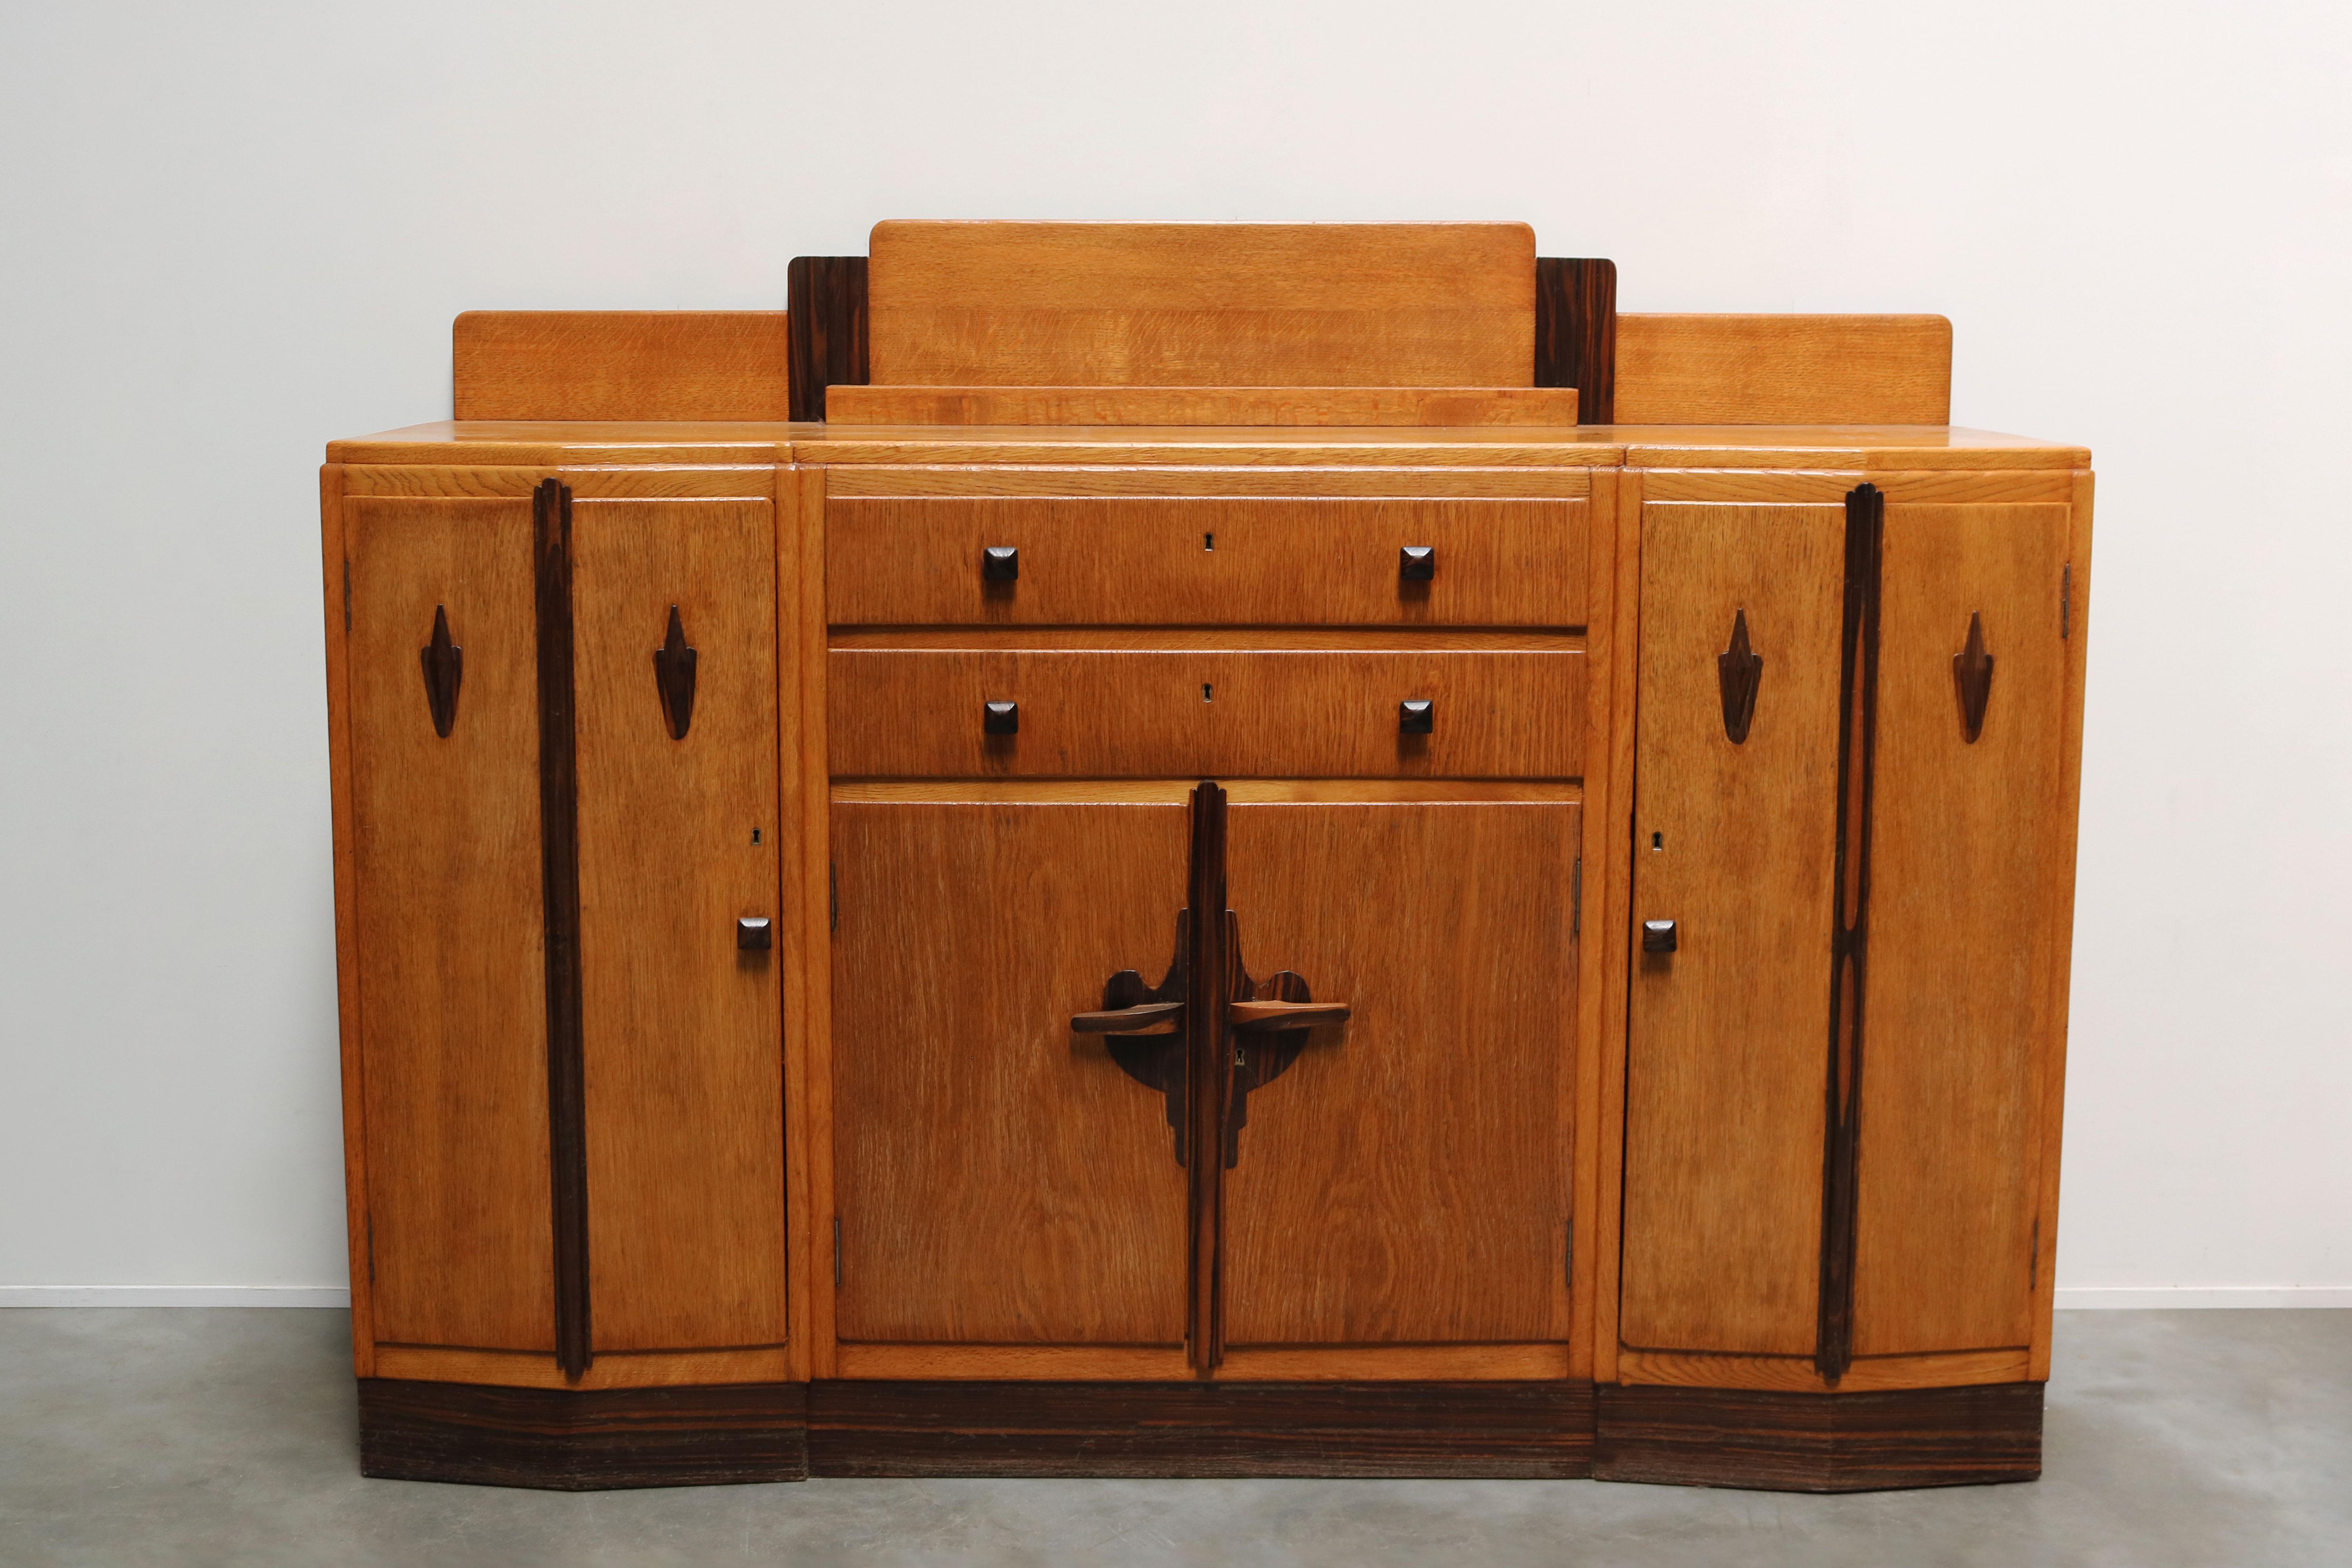 Superb Dutch Art Deco sideboard / credenza in the Amsterdam School design style by Brunott. 
Brunott is famous for high quality Amsterdam school design and this sideboard perfectly reflects that. 
Made from Solid European oak with exotic wood